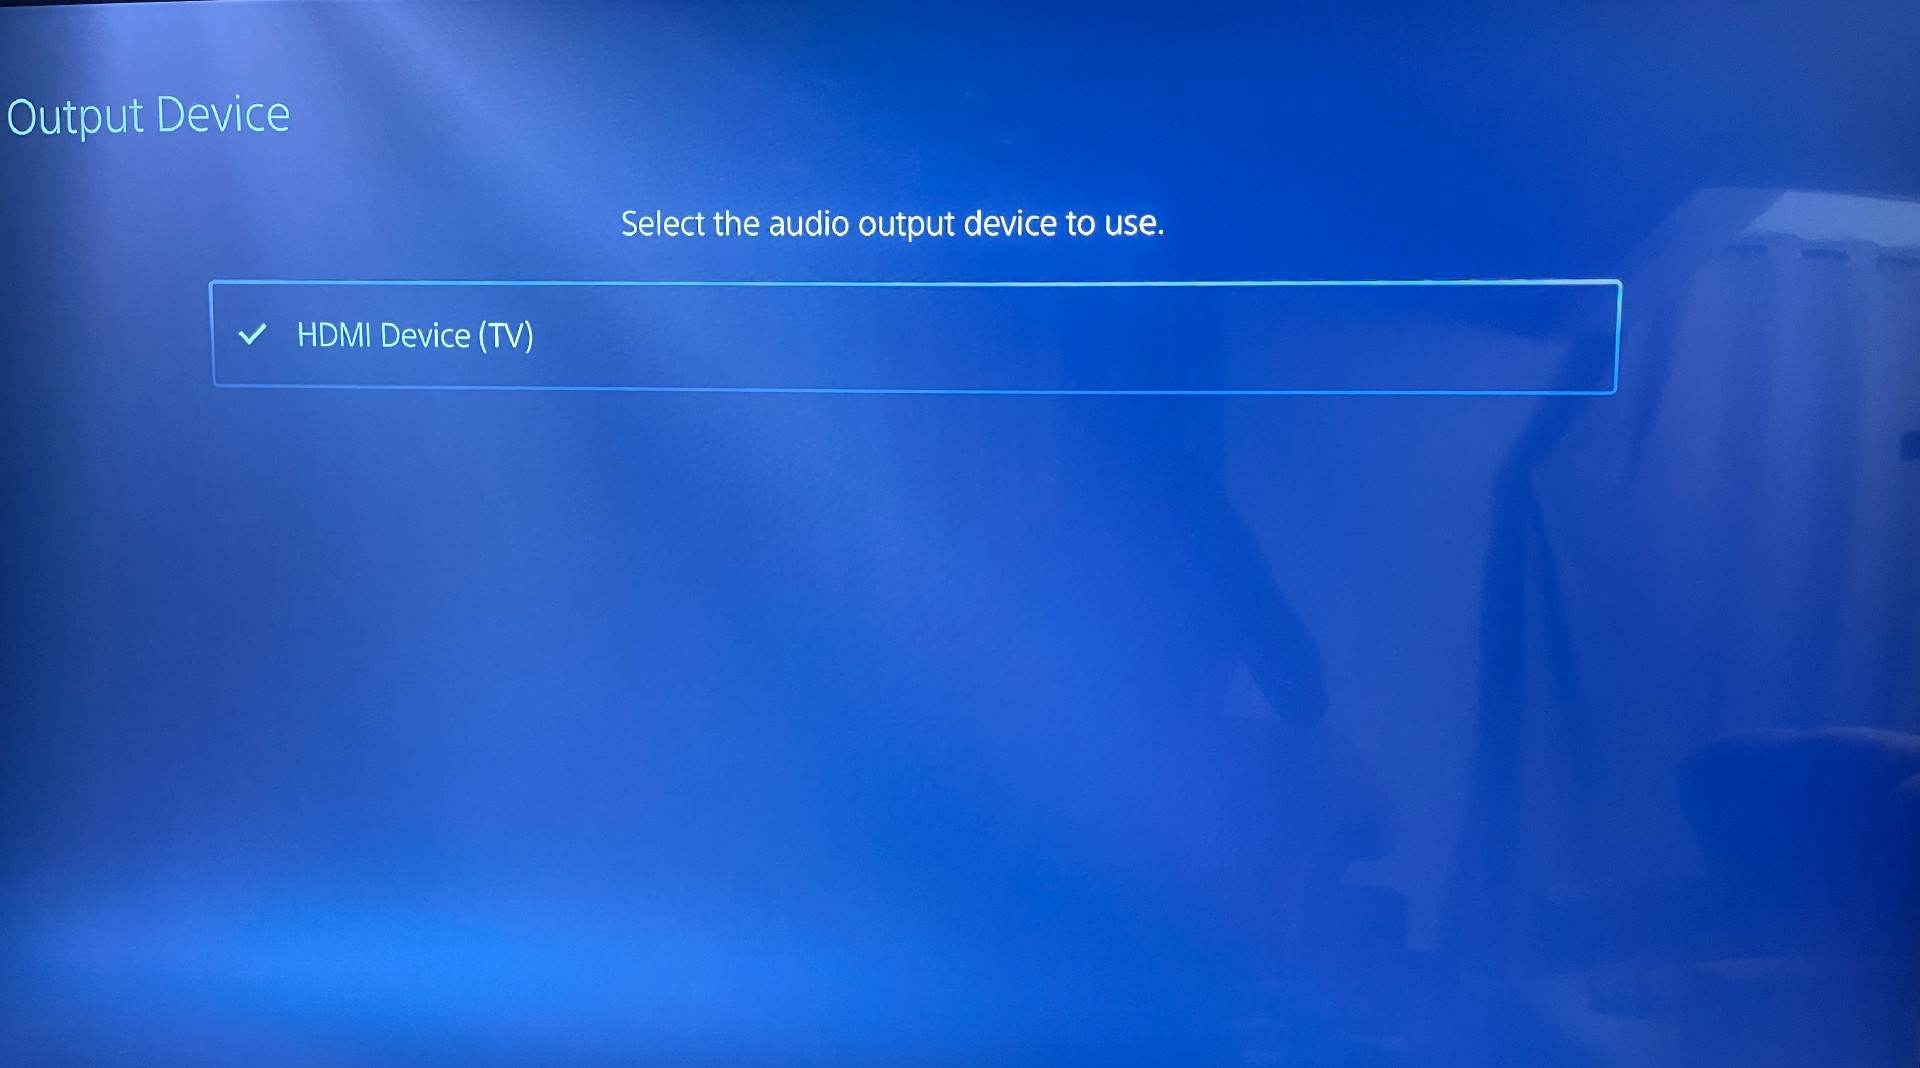 PS5 Audio Output selection page